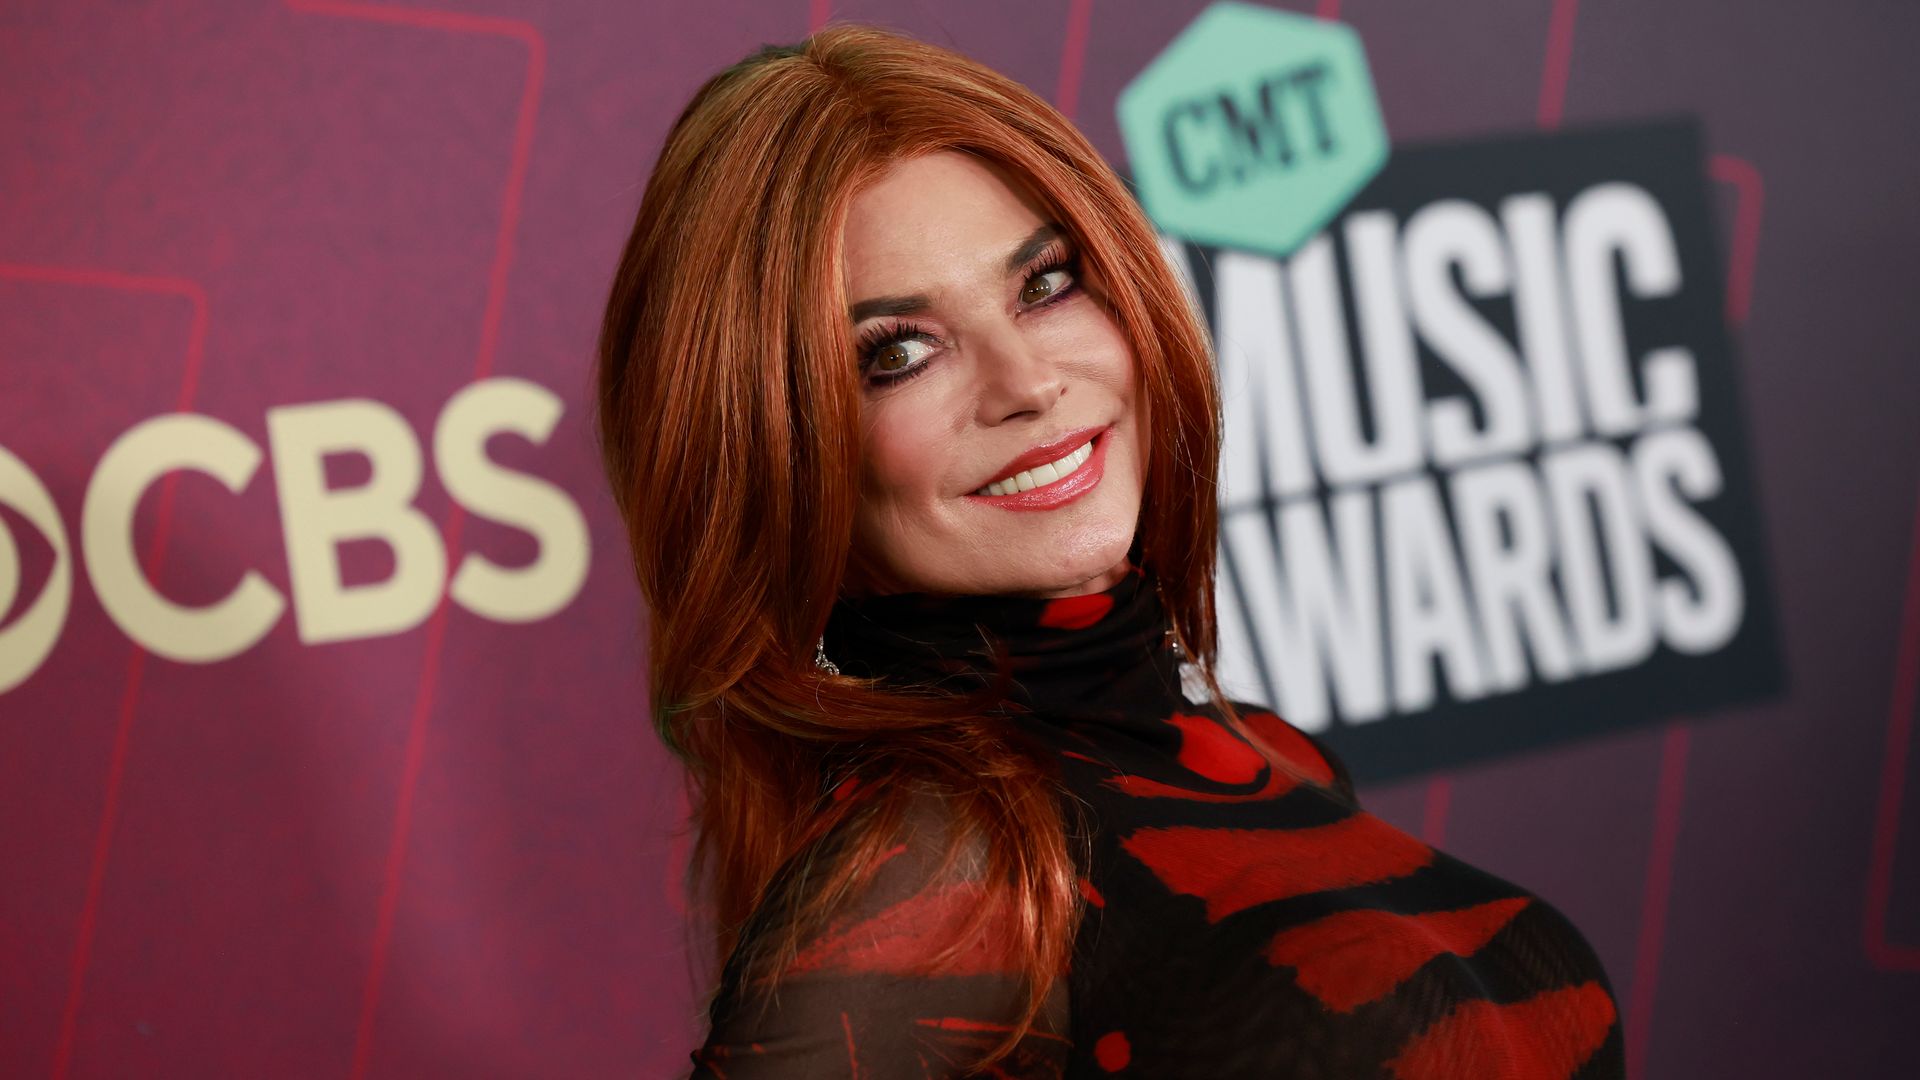 Shania Twain attends the 2023 CMT Music Awards at Moody Center on April 02, 2023 in Austin, Texas.